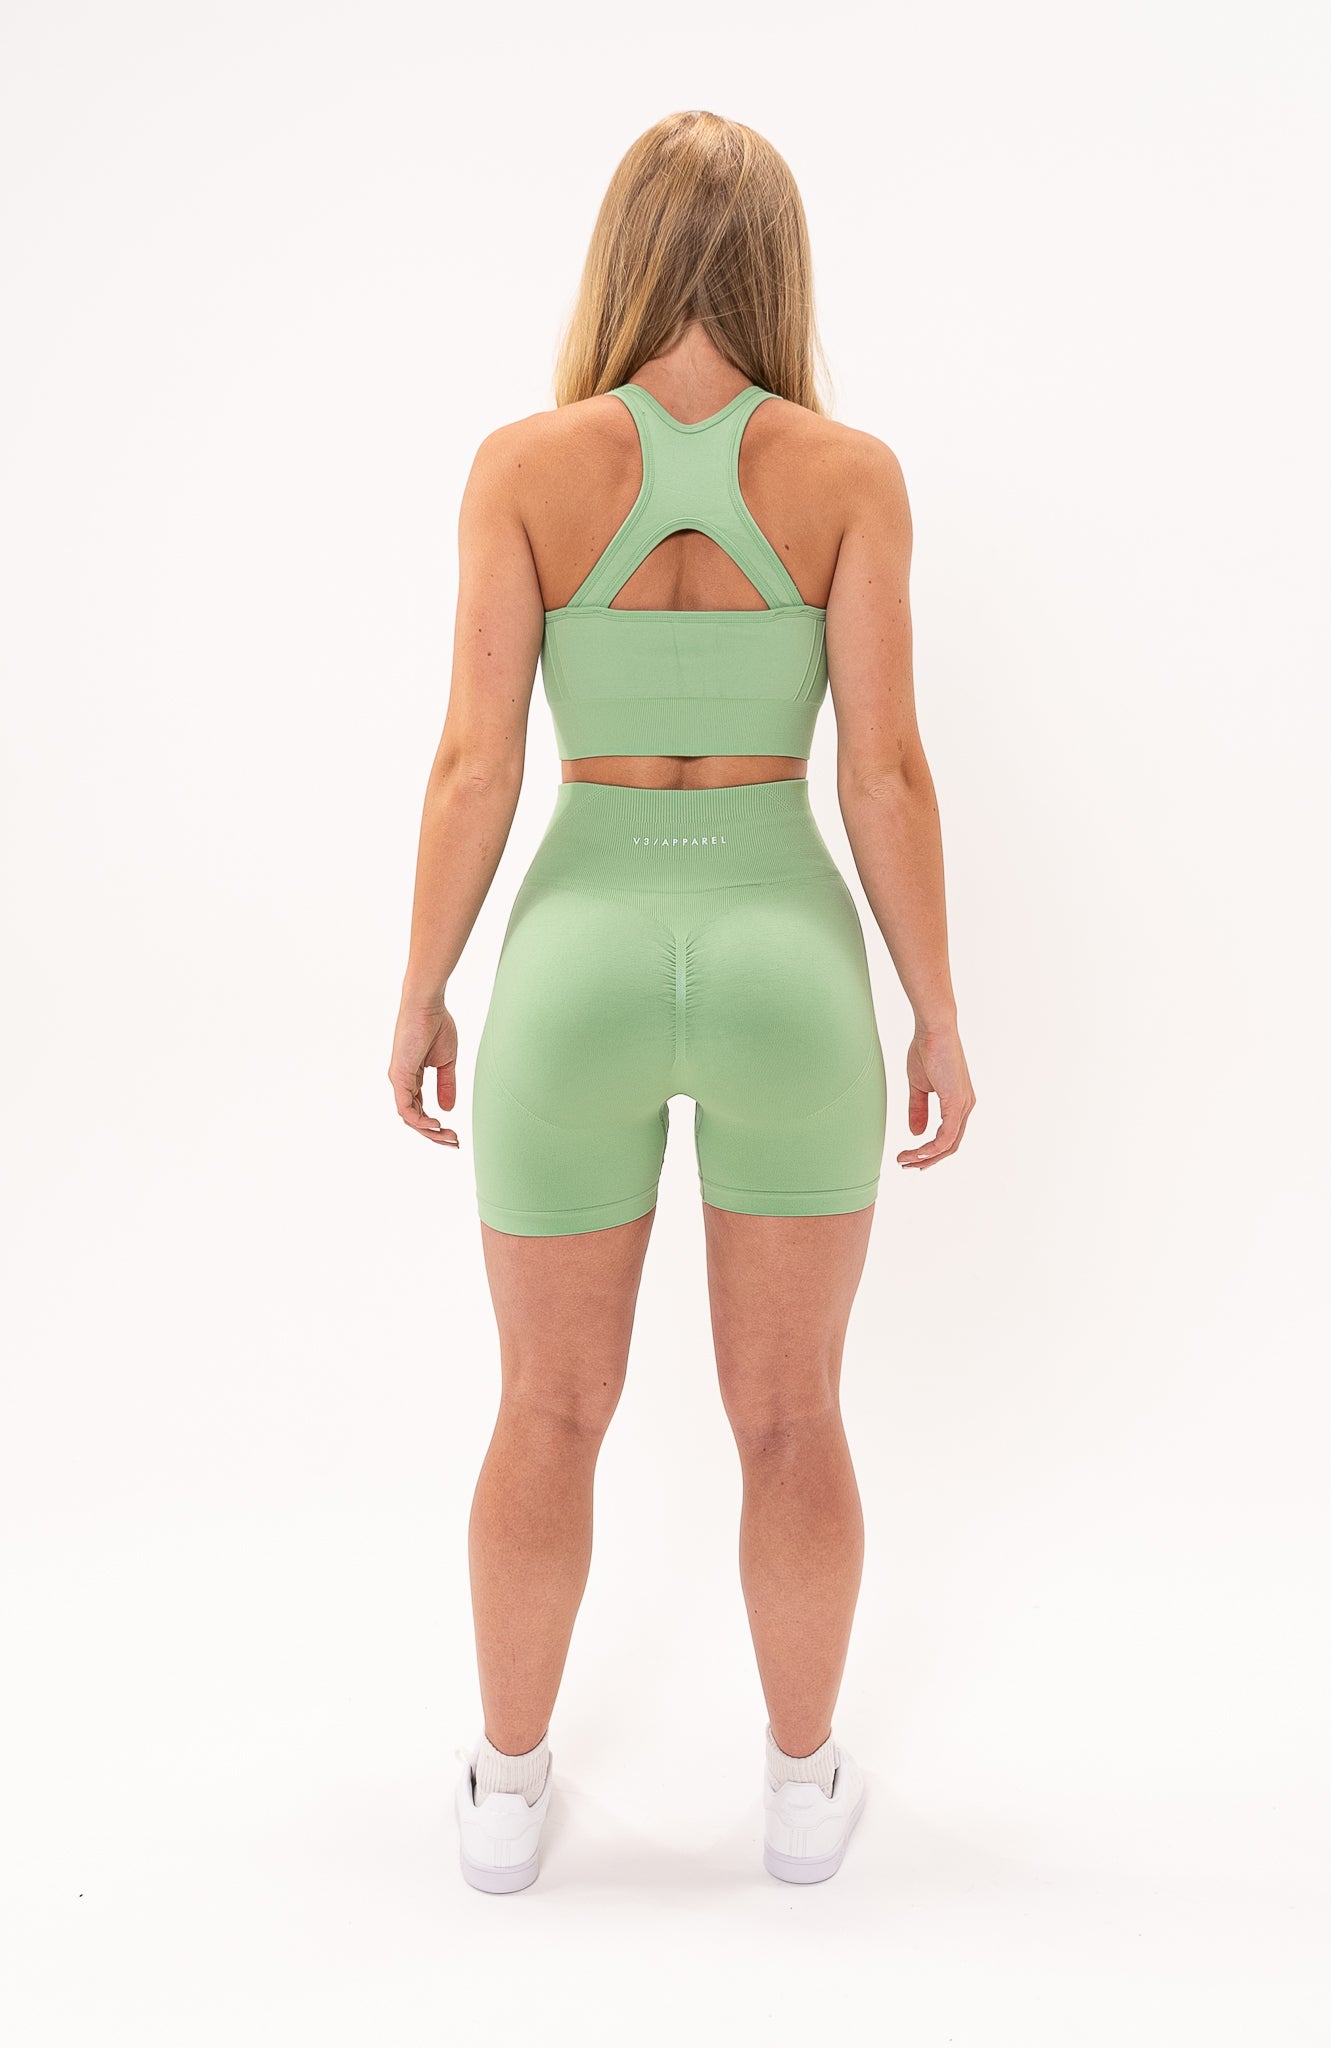 V3 Apparel Women's Tempo seamless scrunch bum shaping high waisted shorts and training sports bra in mint green – Squat proof 5 inch leg cycle shorts and training bra for Gym workouts training, Running, yoga, bodybuilding and bikini fitness.